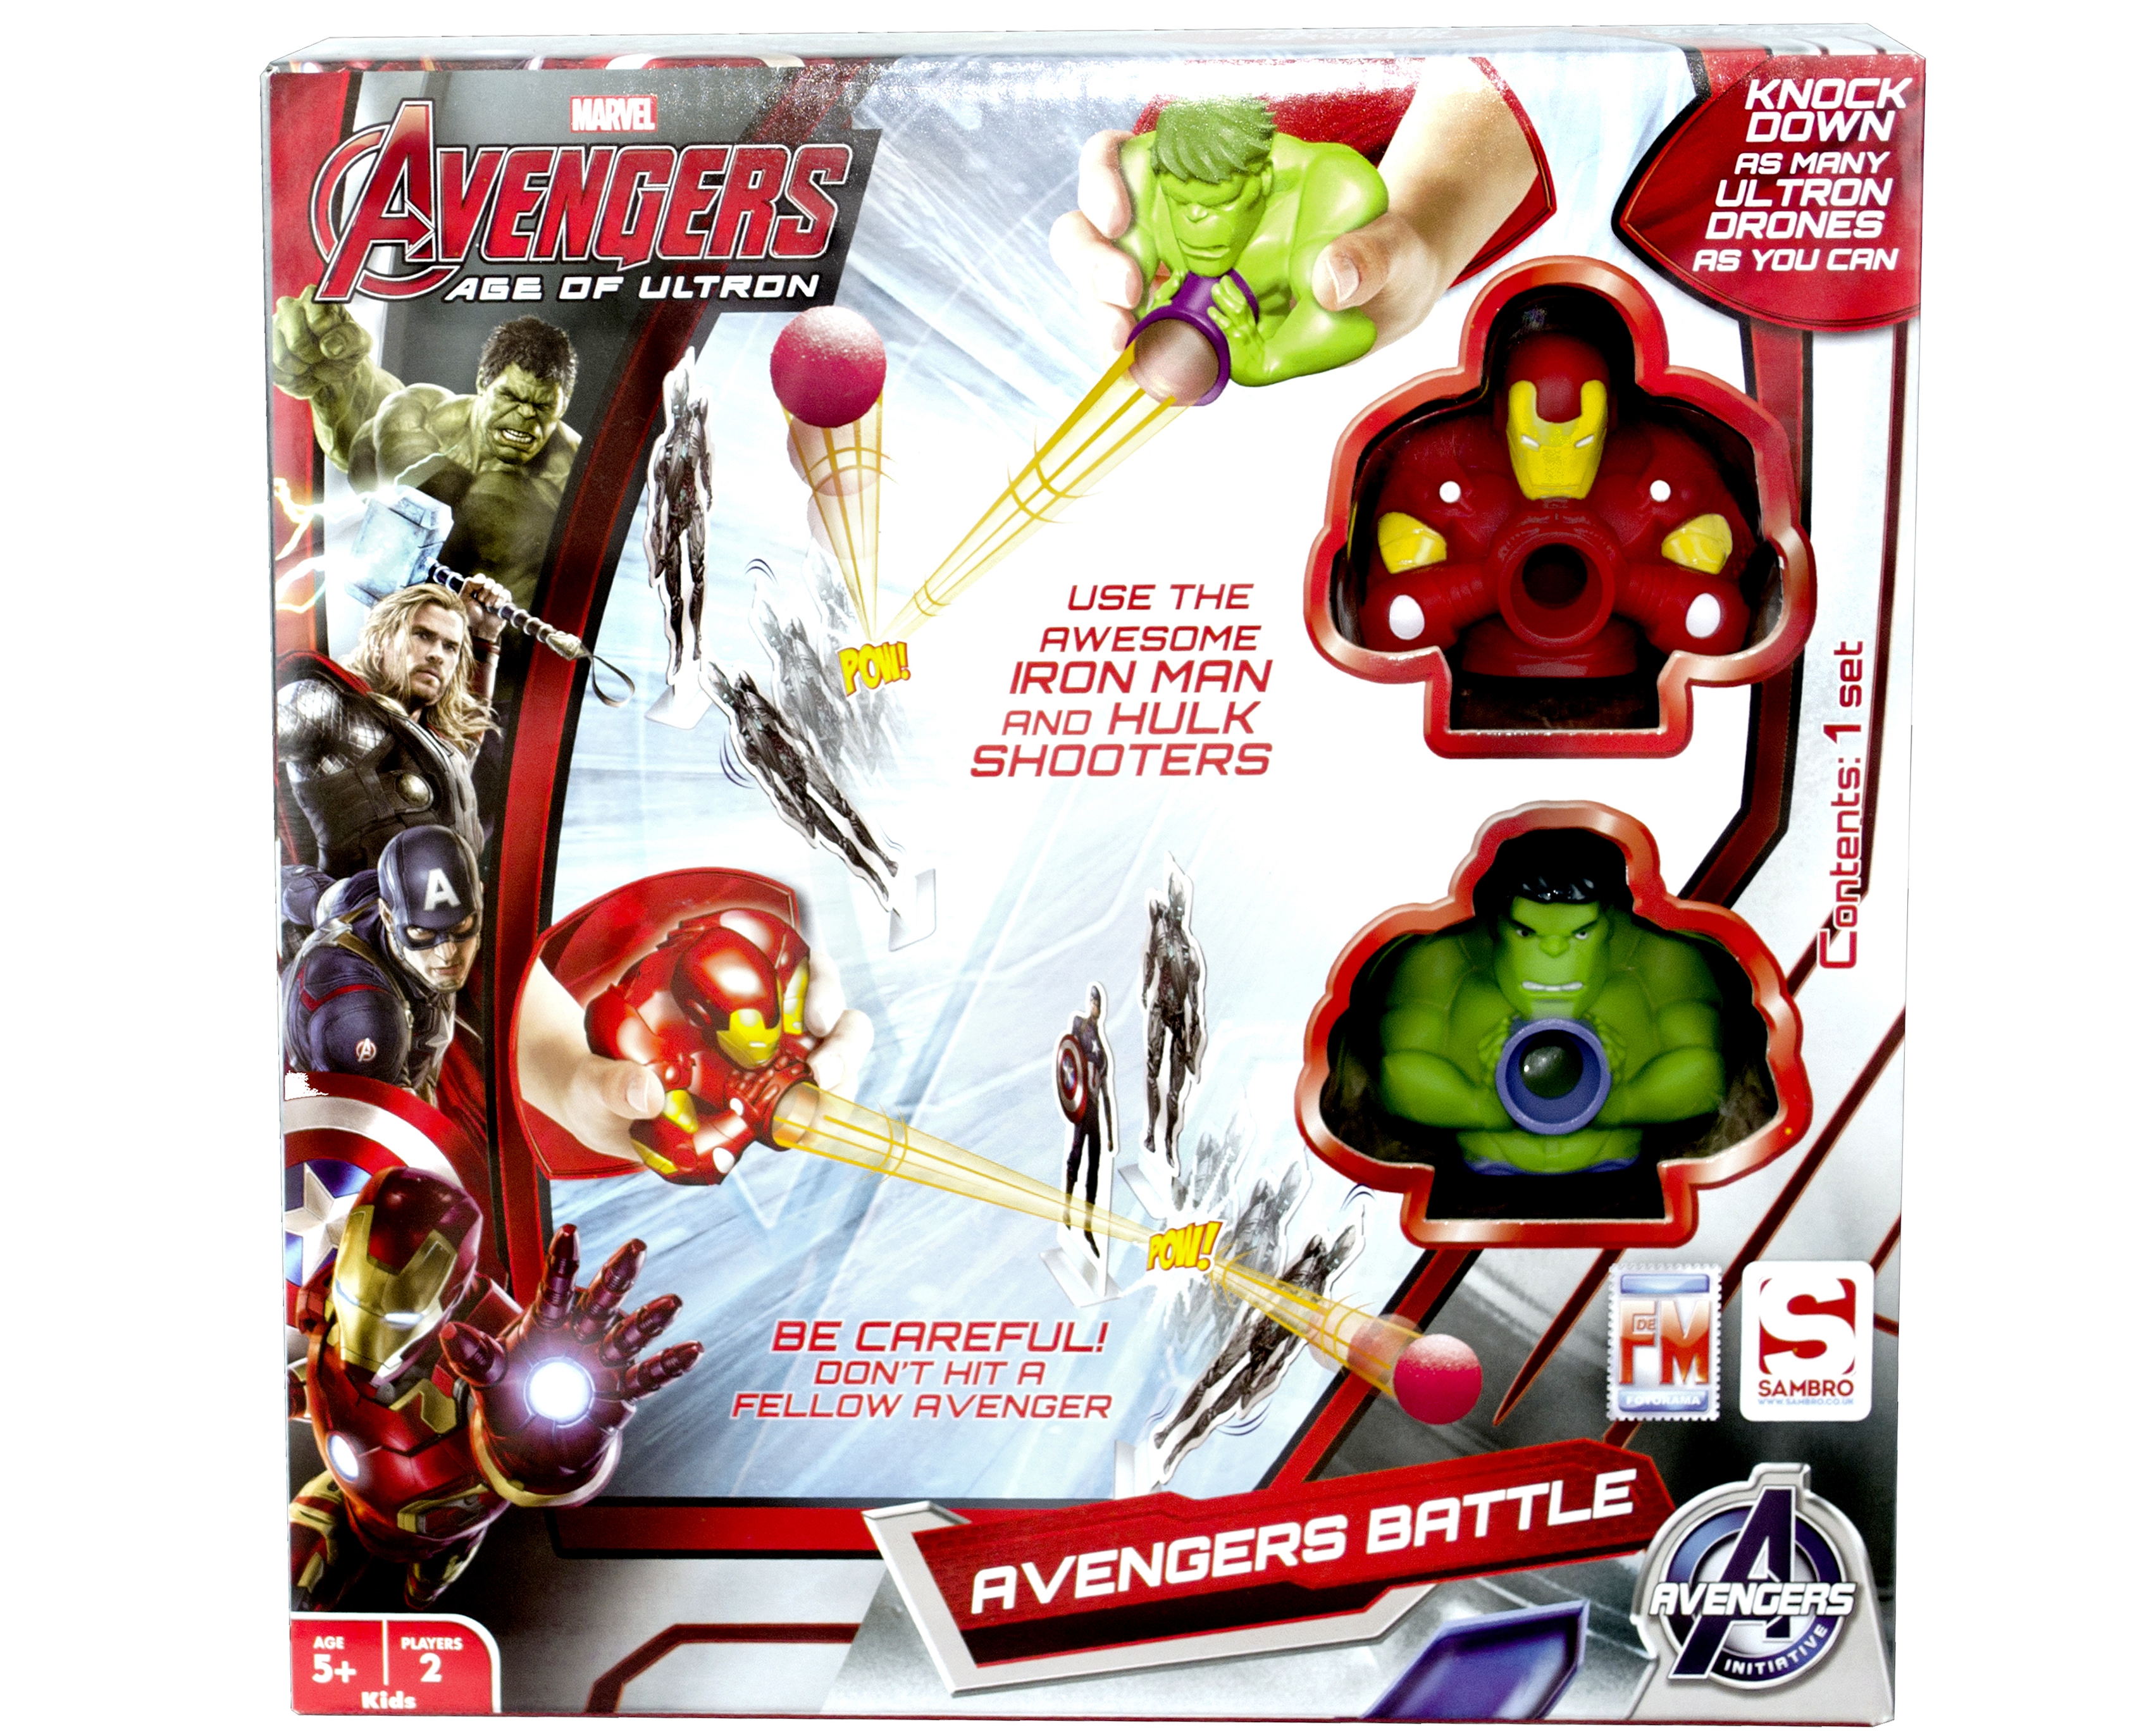 Marvel Avengers Age of Ultron 'Battle' Other Games Game